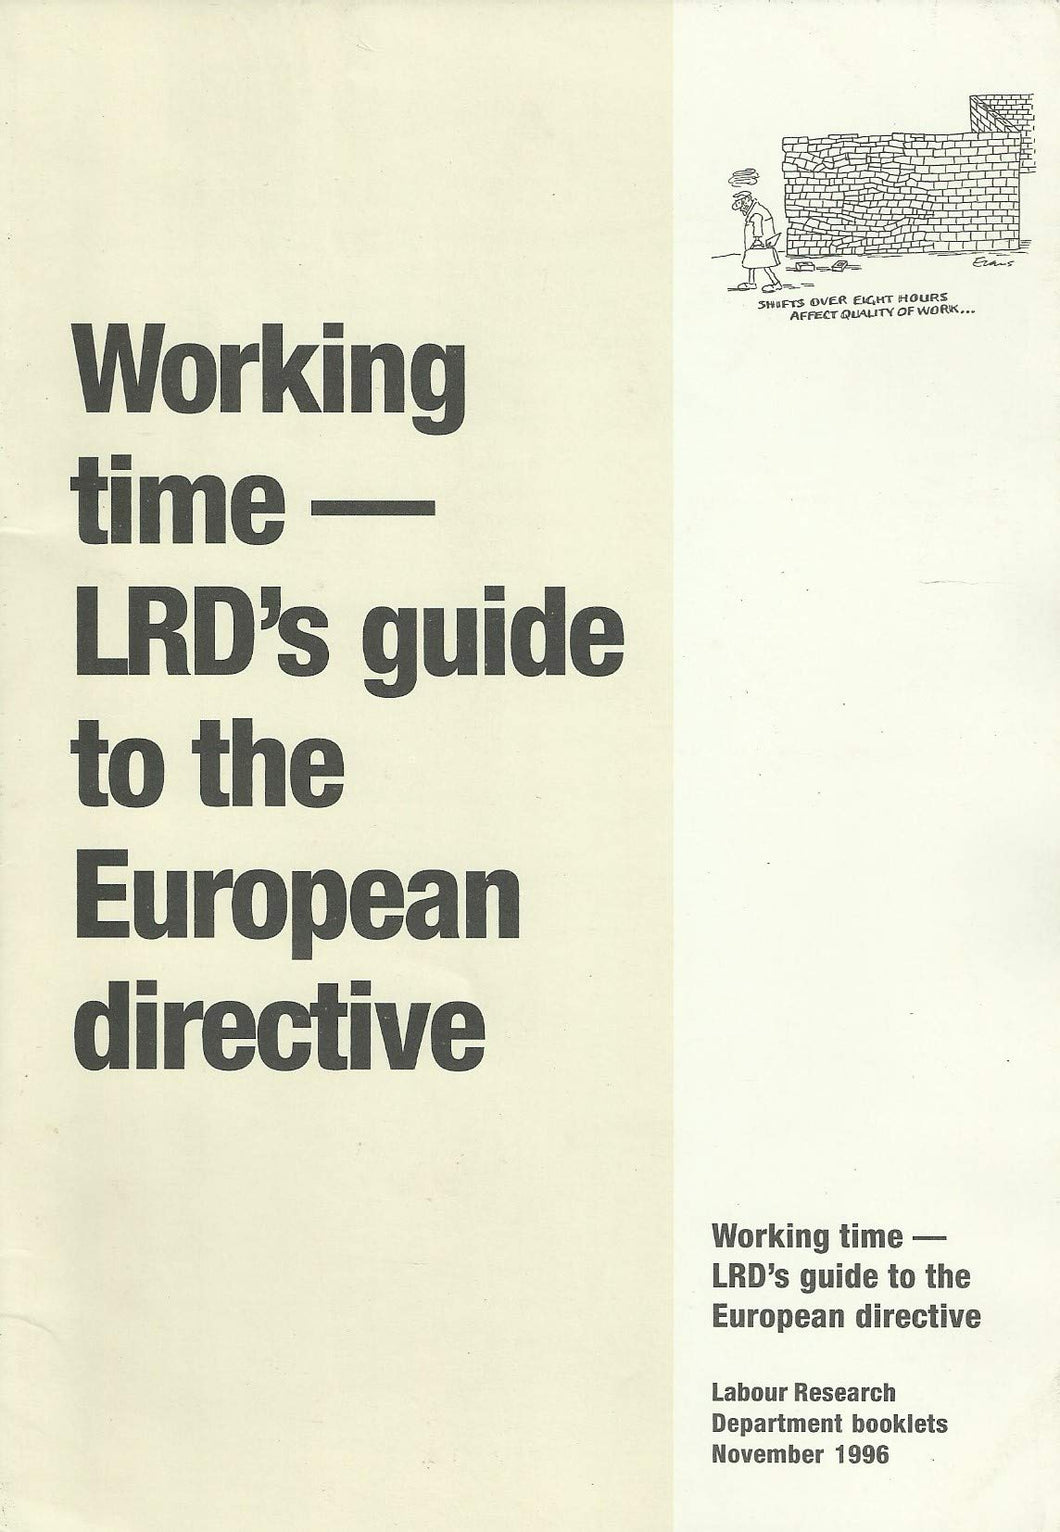 Working time: LRD's guide to the European directive (LRD booklets)